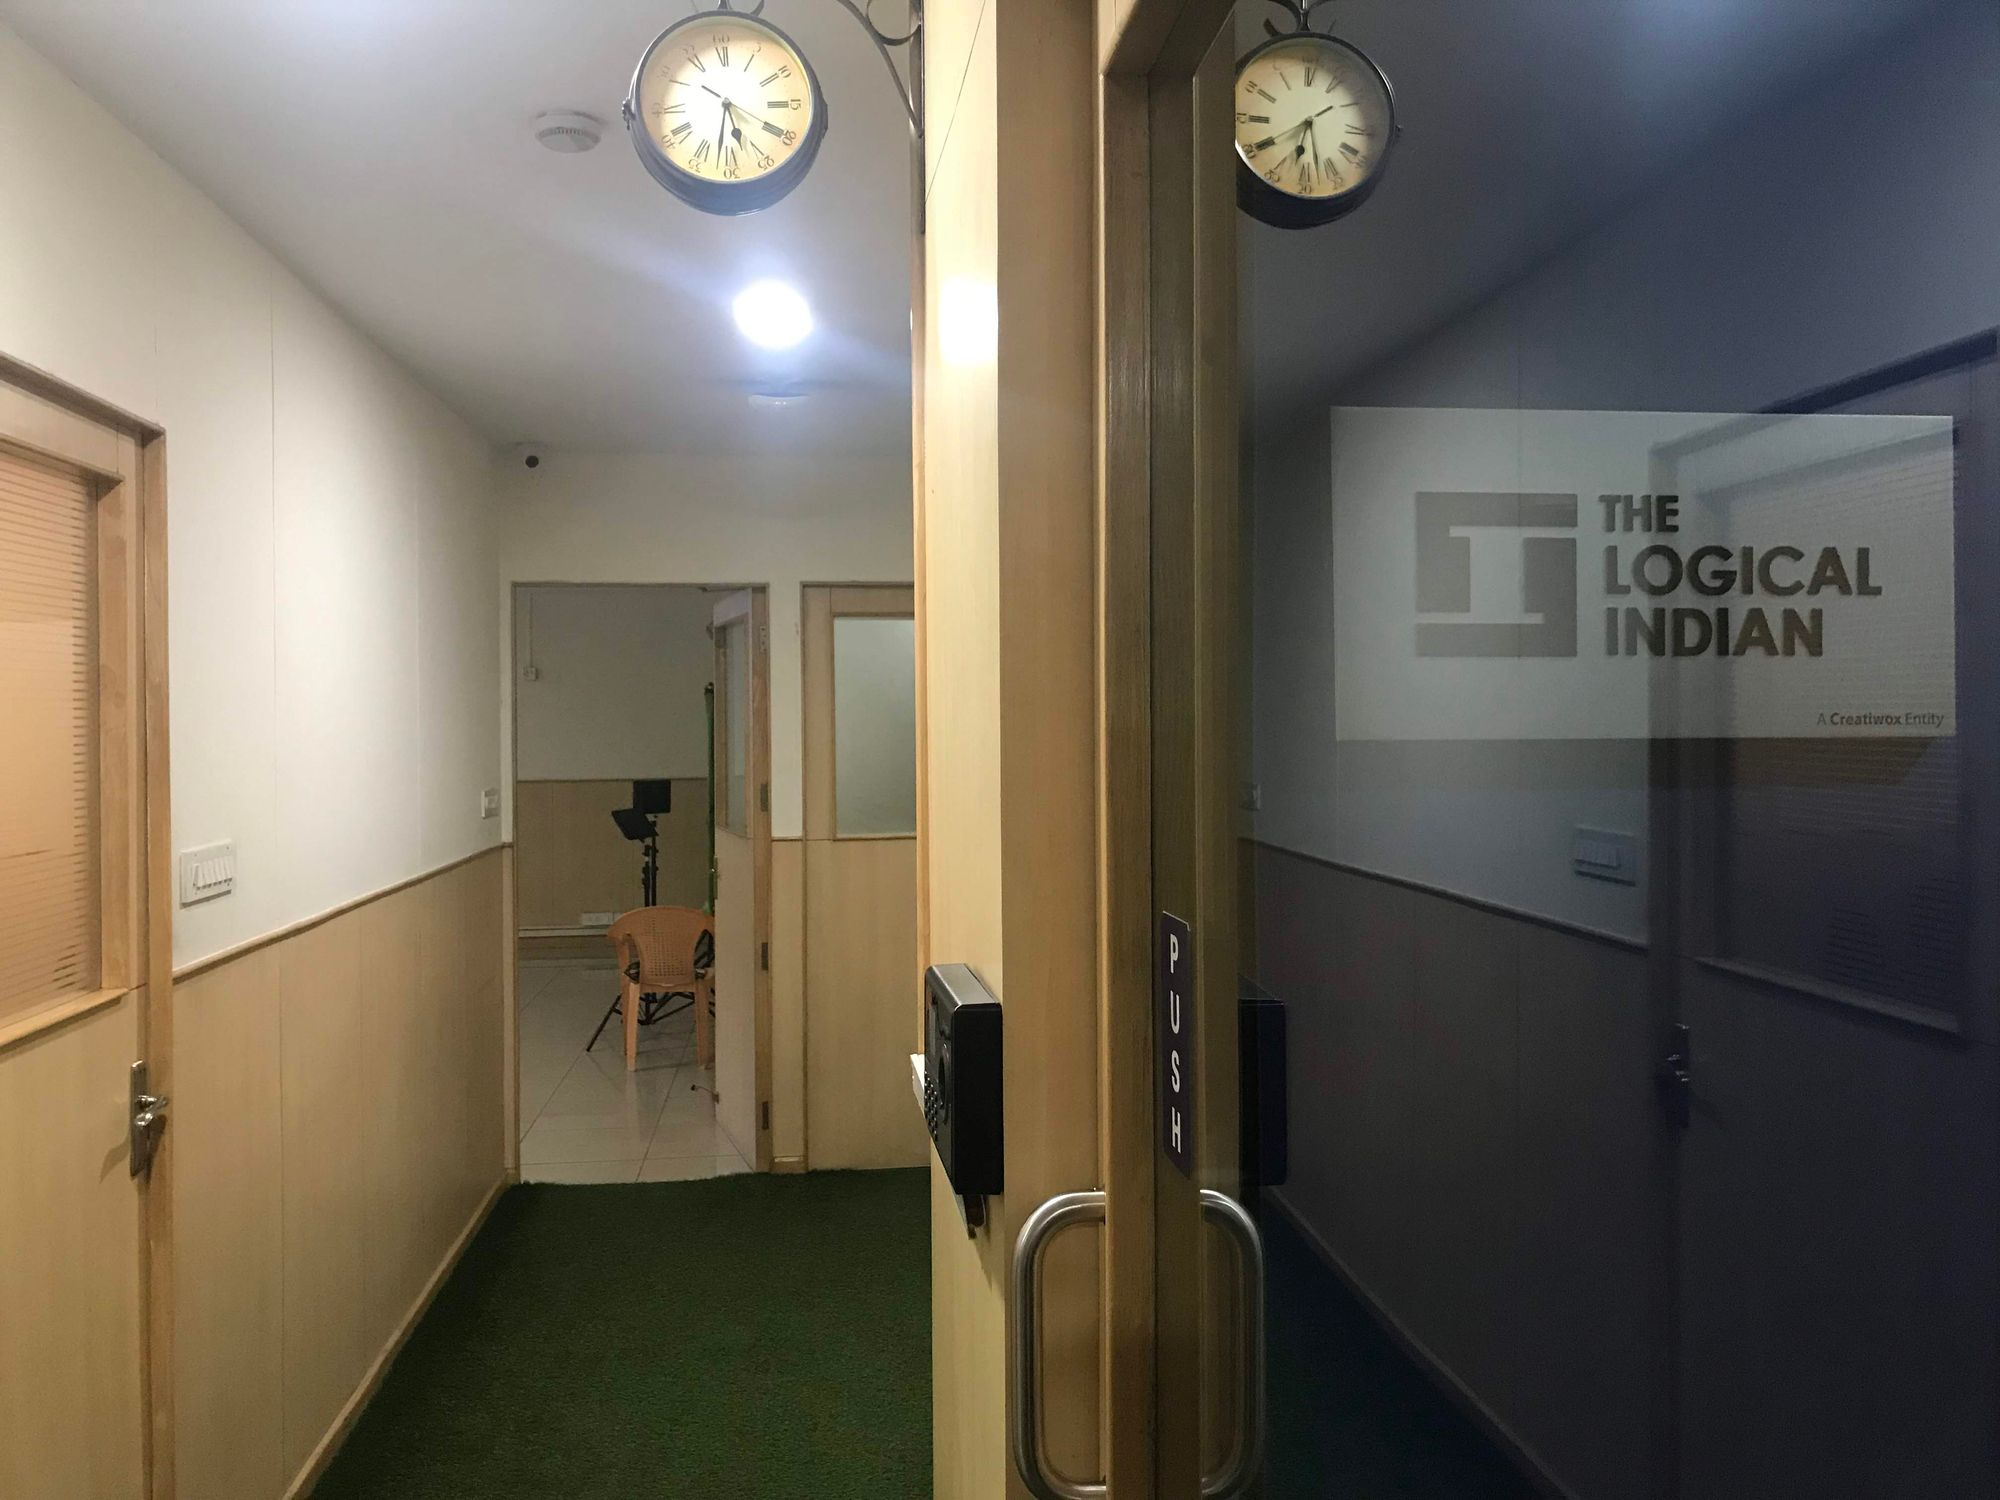 The rustic clock in The Logical Indian office corridor reflect the culture of the company that marries time and truth.